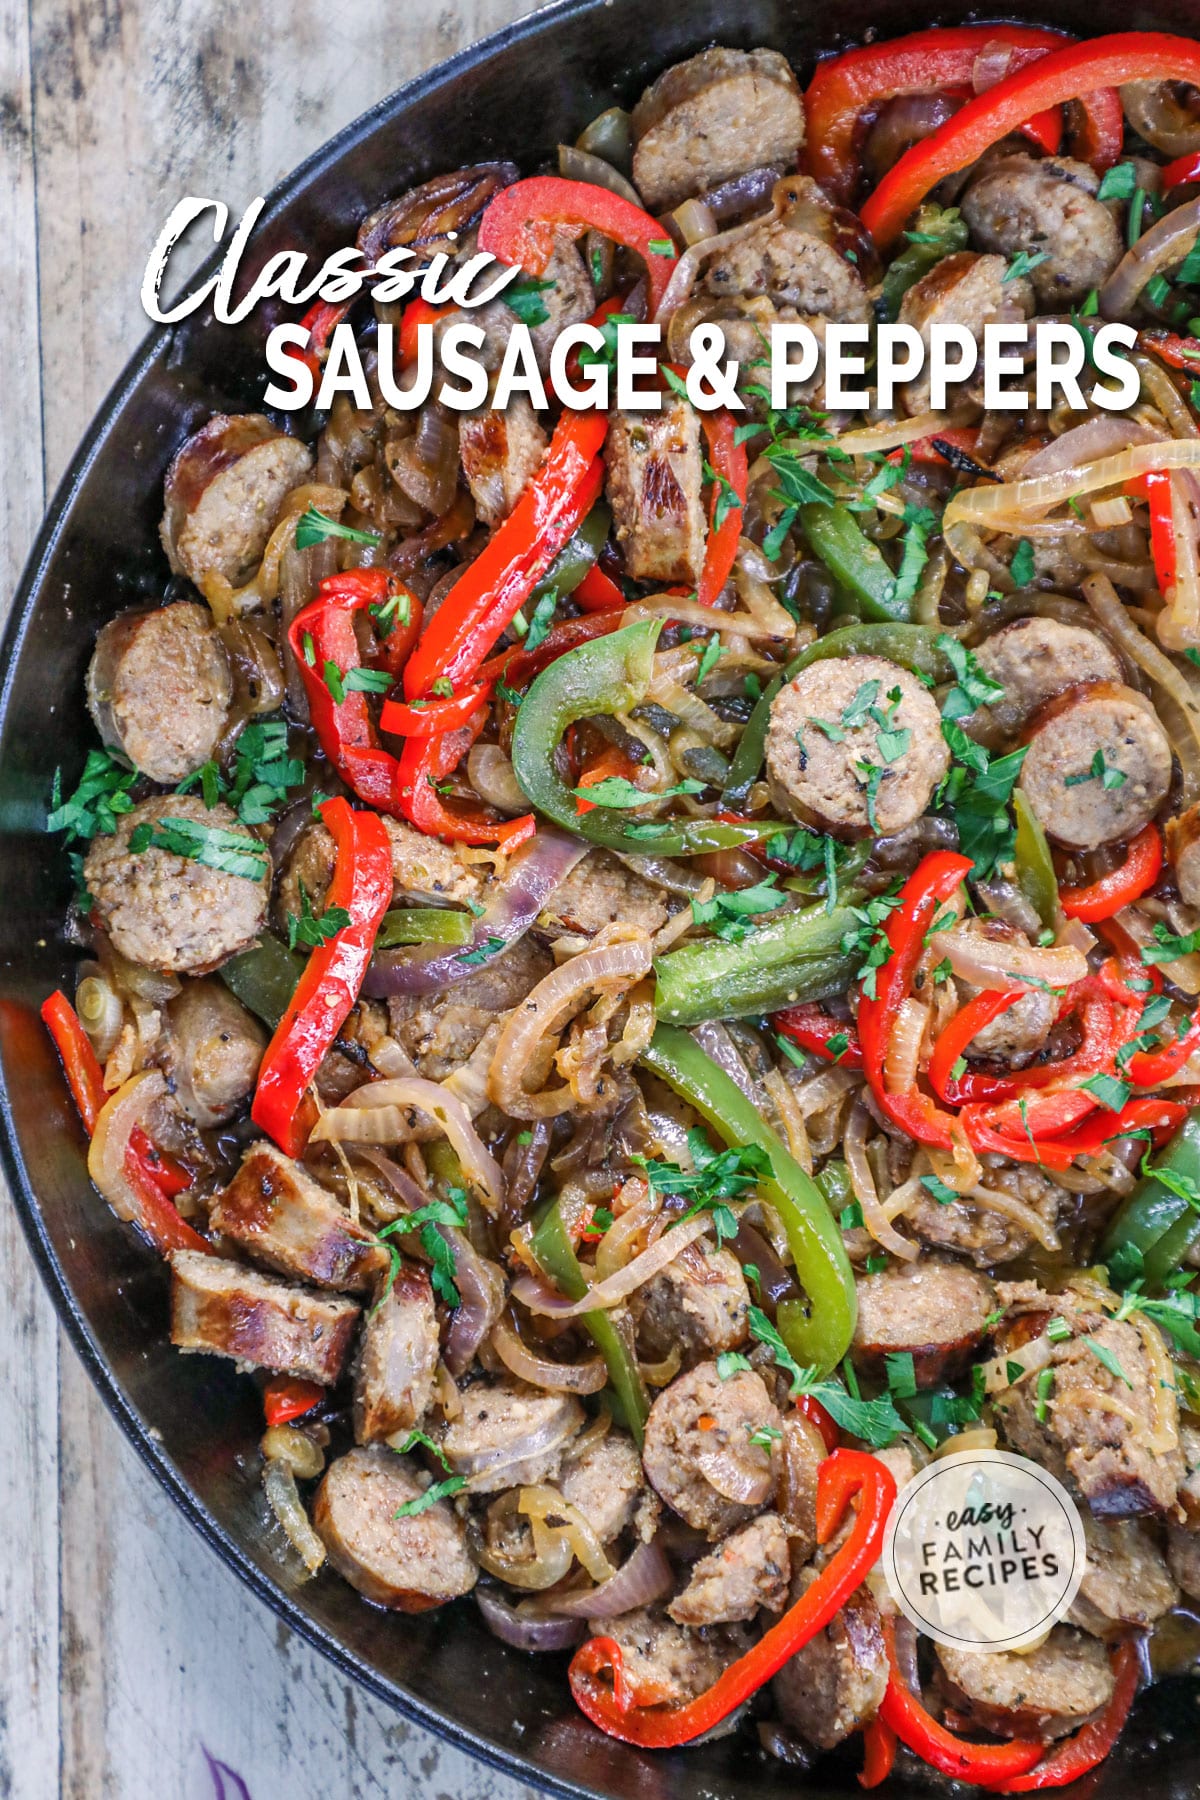 Overhead view of Italian Sausage and Peppers in skillet